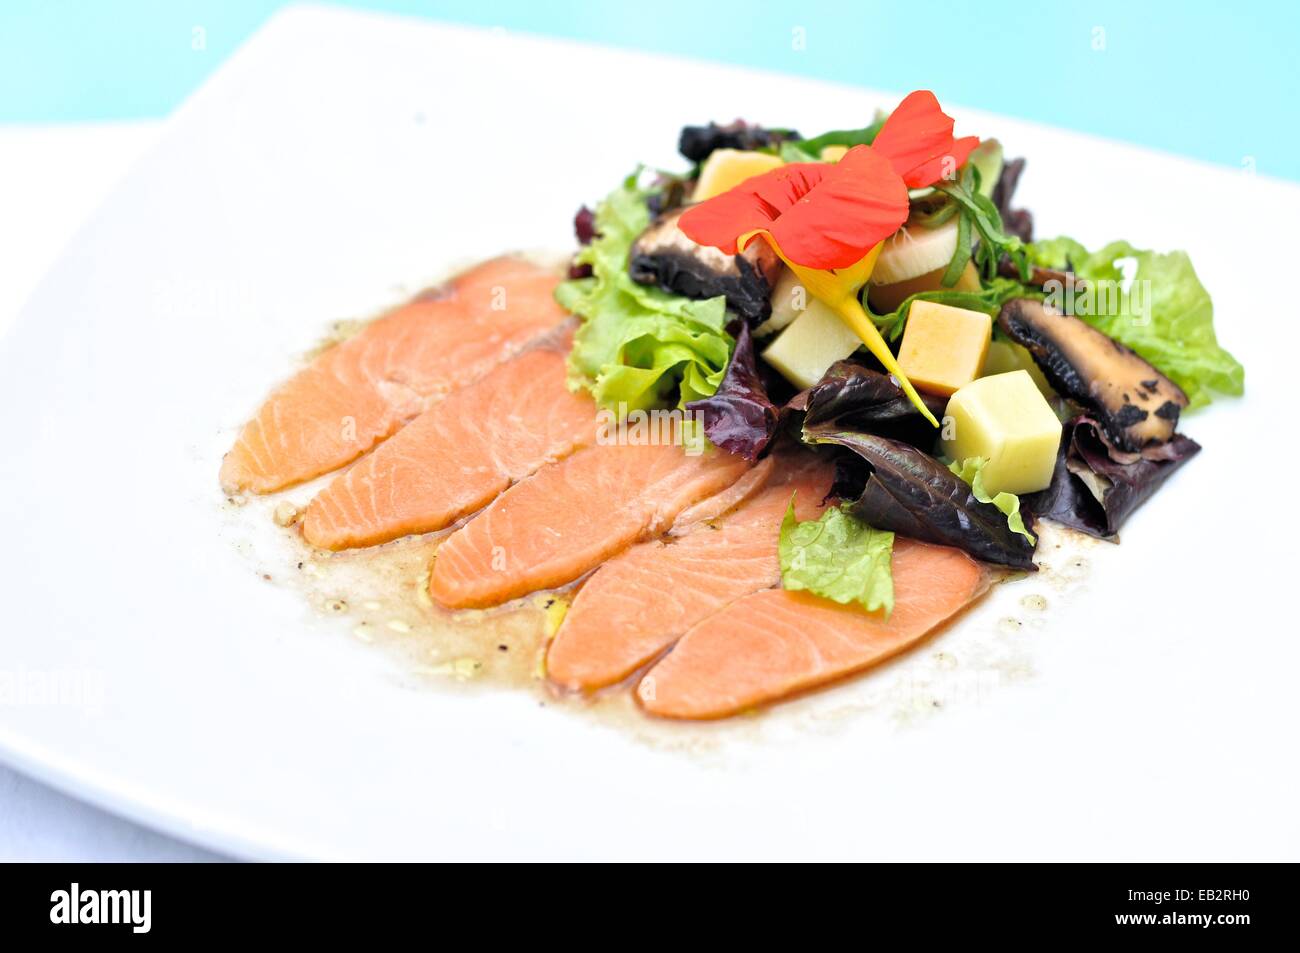 Salmon carpaccio with salad Healthy salad with corn, mushrooms, cheese, tomato and lettuce. Stock Photo